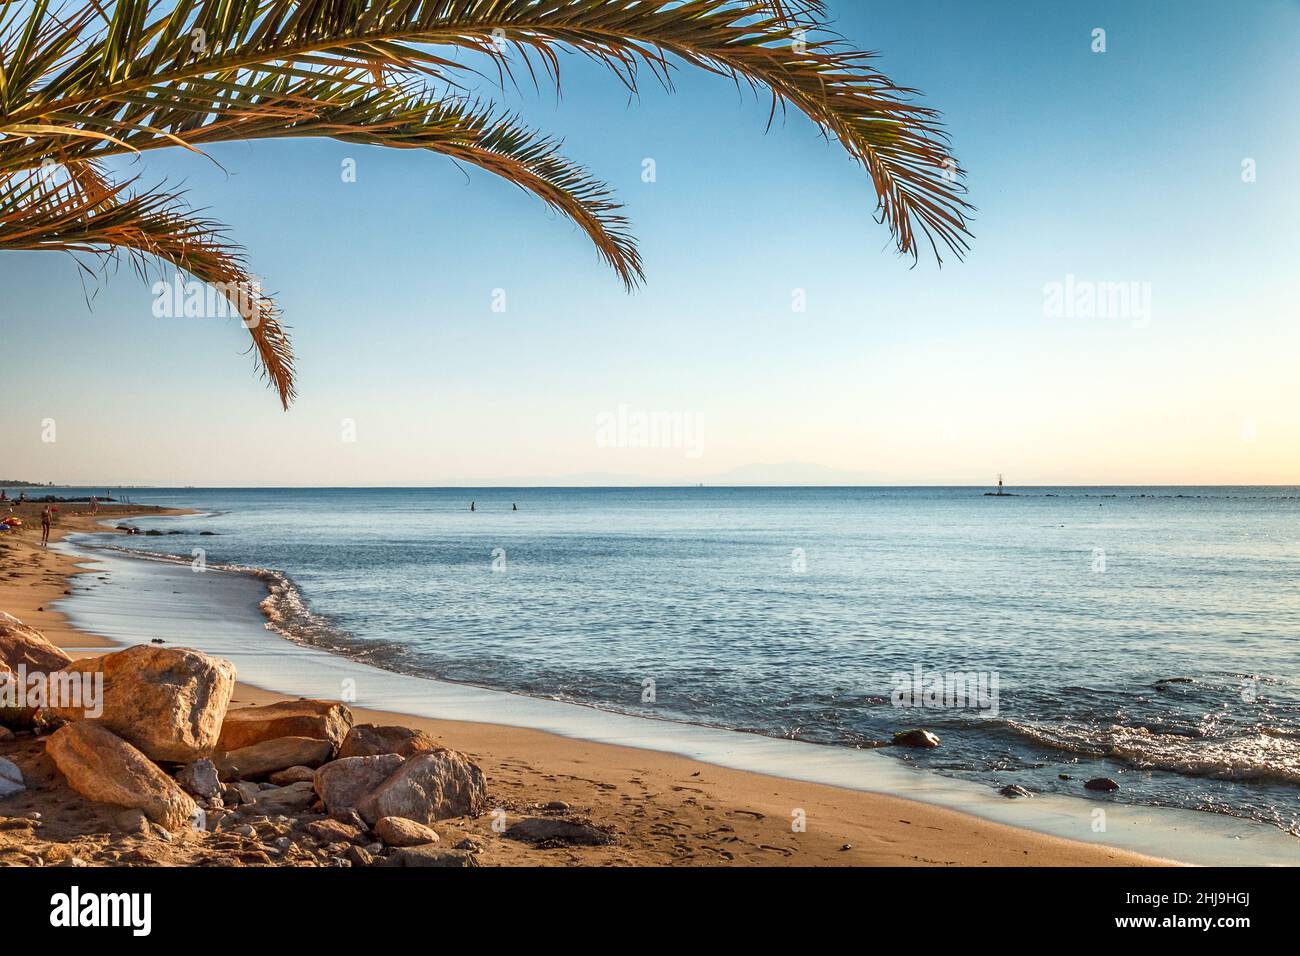 Sea view and sandy beach in The Paralia, a tourist seaside part of the municipality Katerini, Greece, Europe. Stock Photo